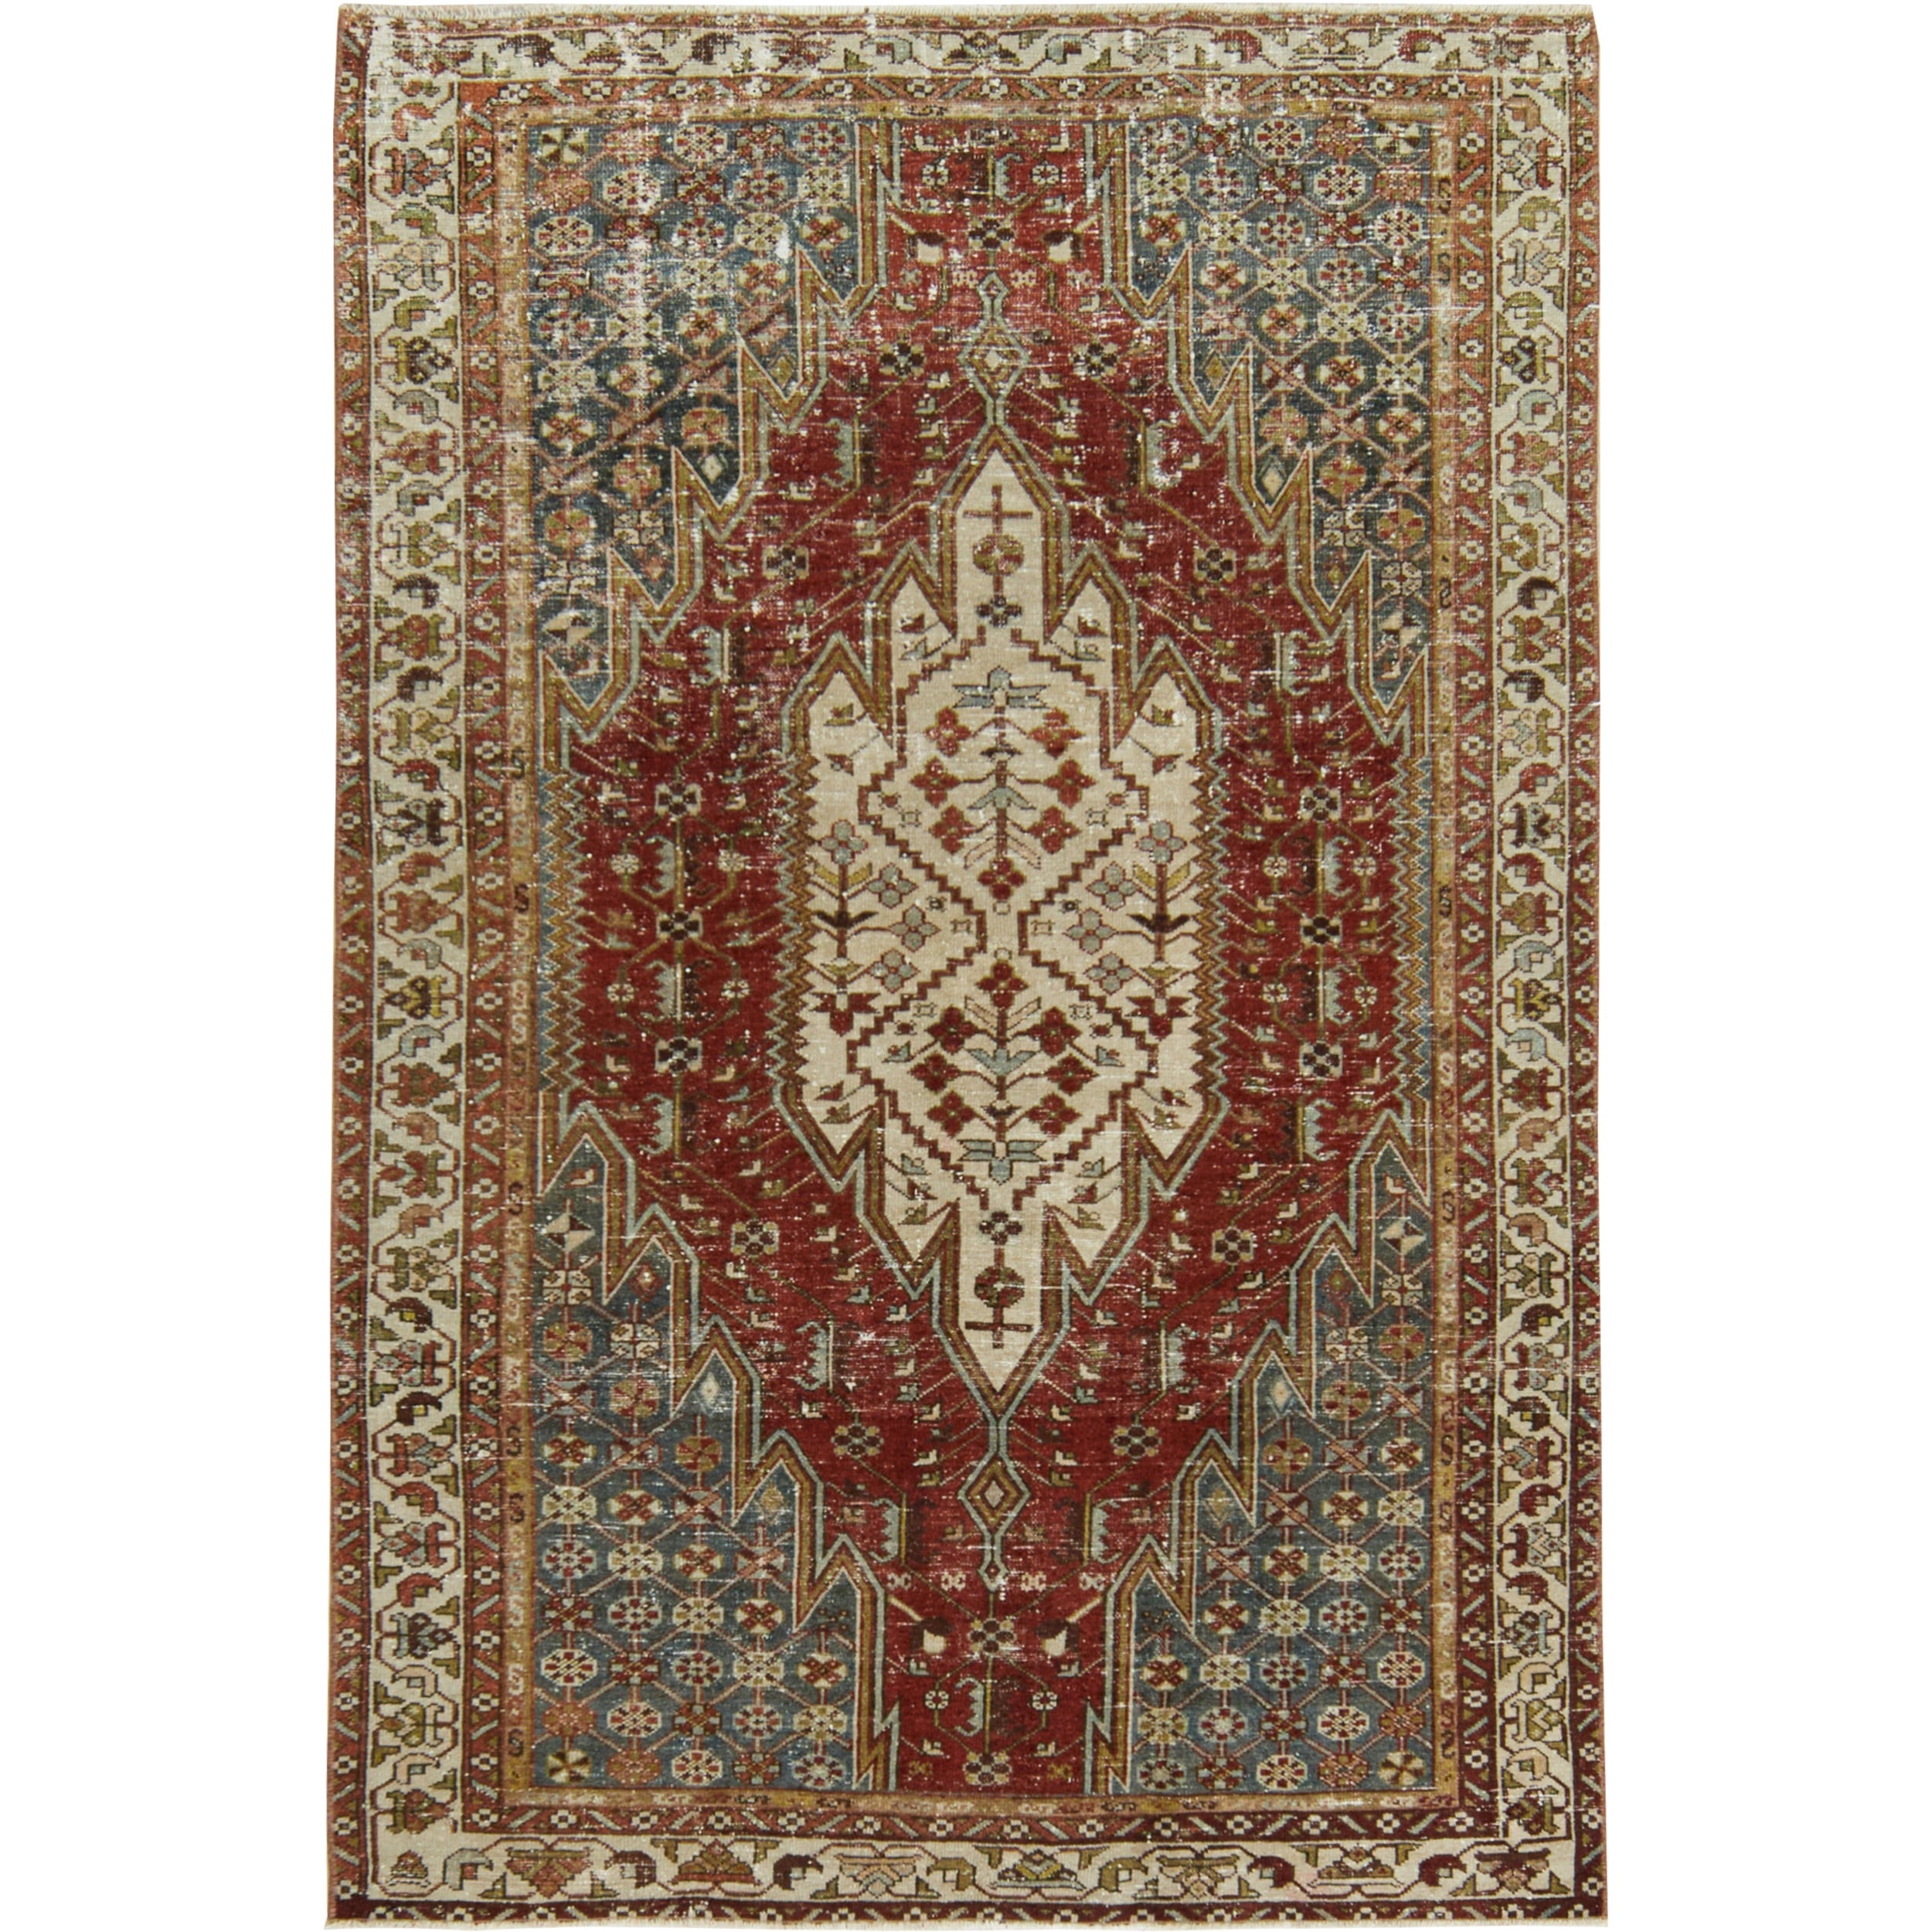 Kaia - The Red Jewel of Persian Rugs | Kuden Rugs